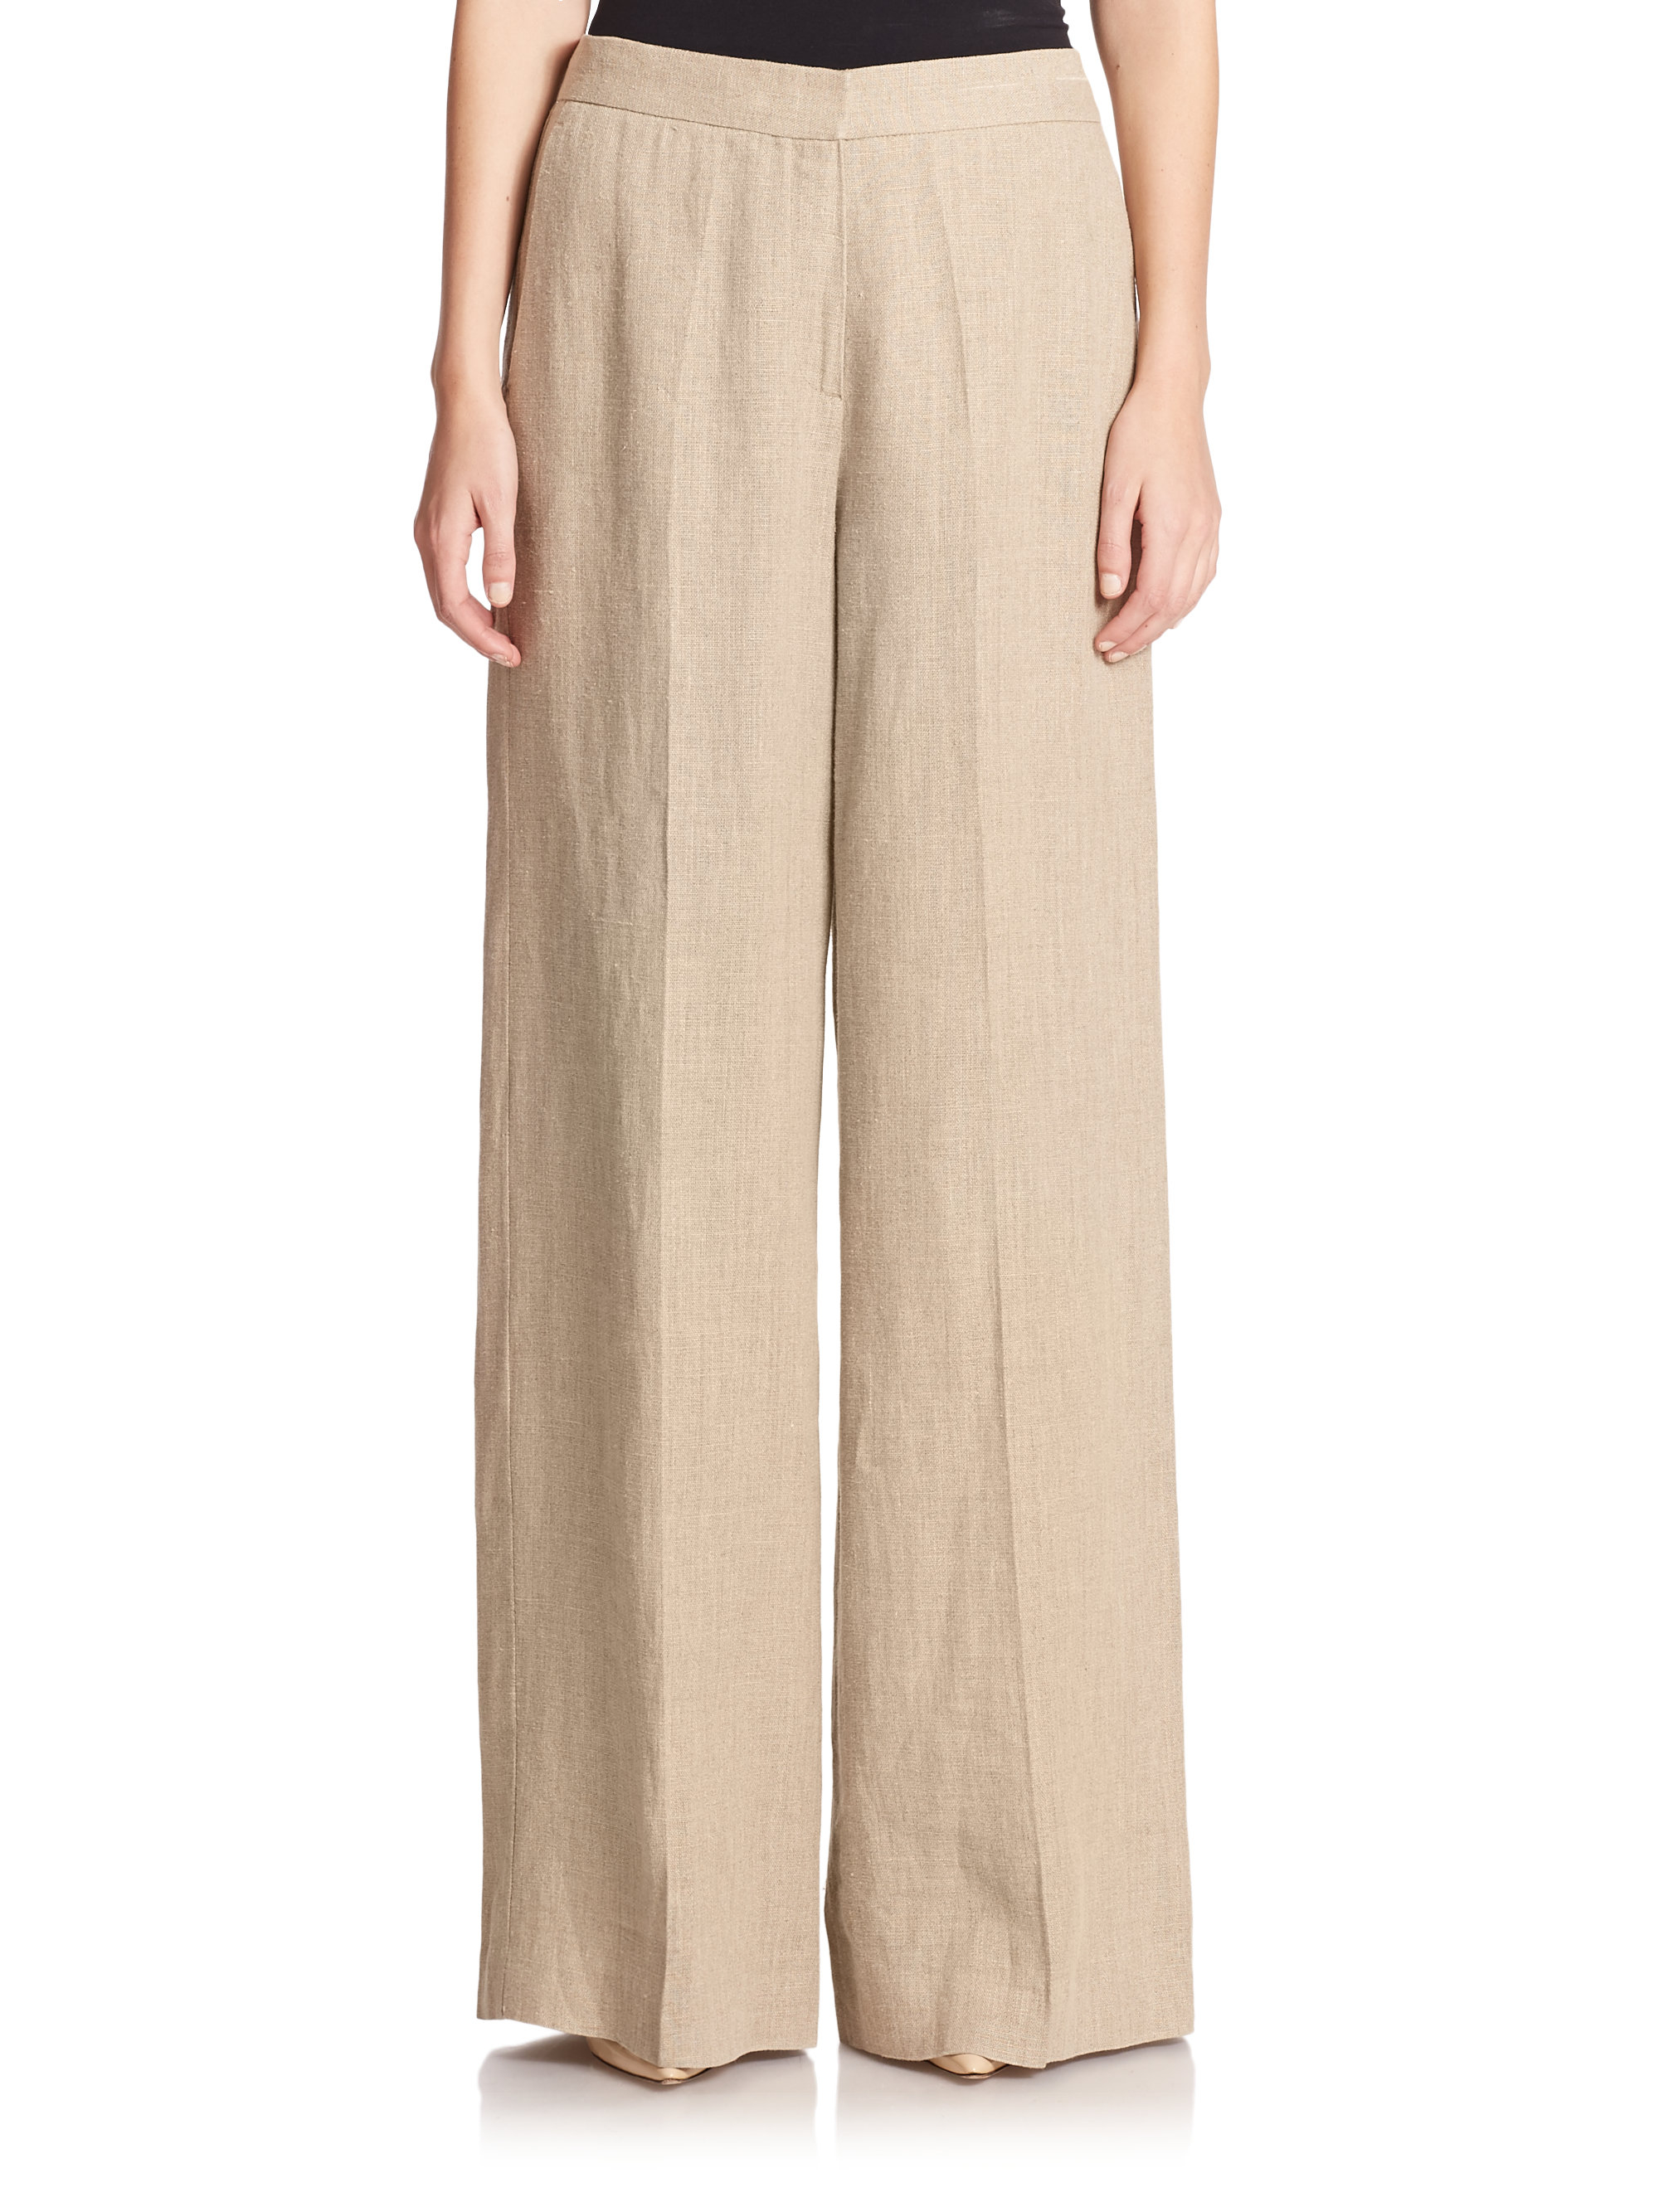 Theory Grinetta Linen Palazzo Pants in Natural | Lyst